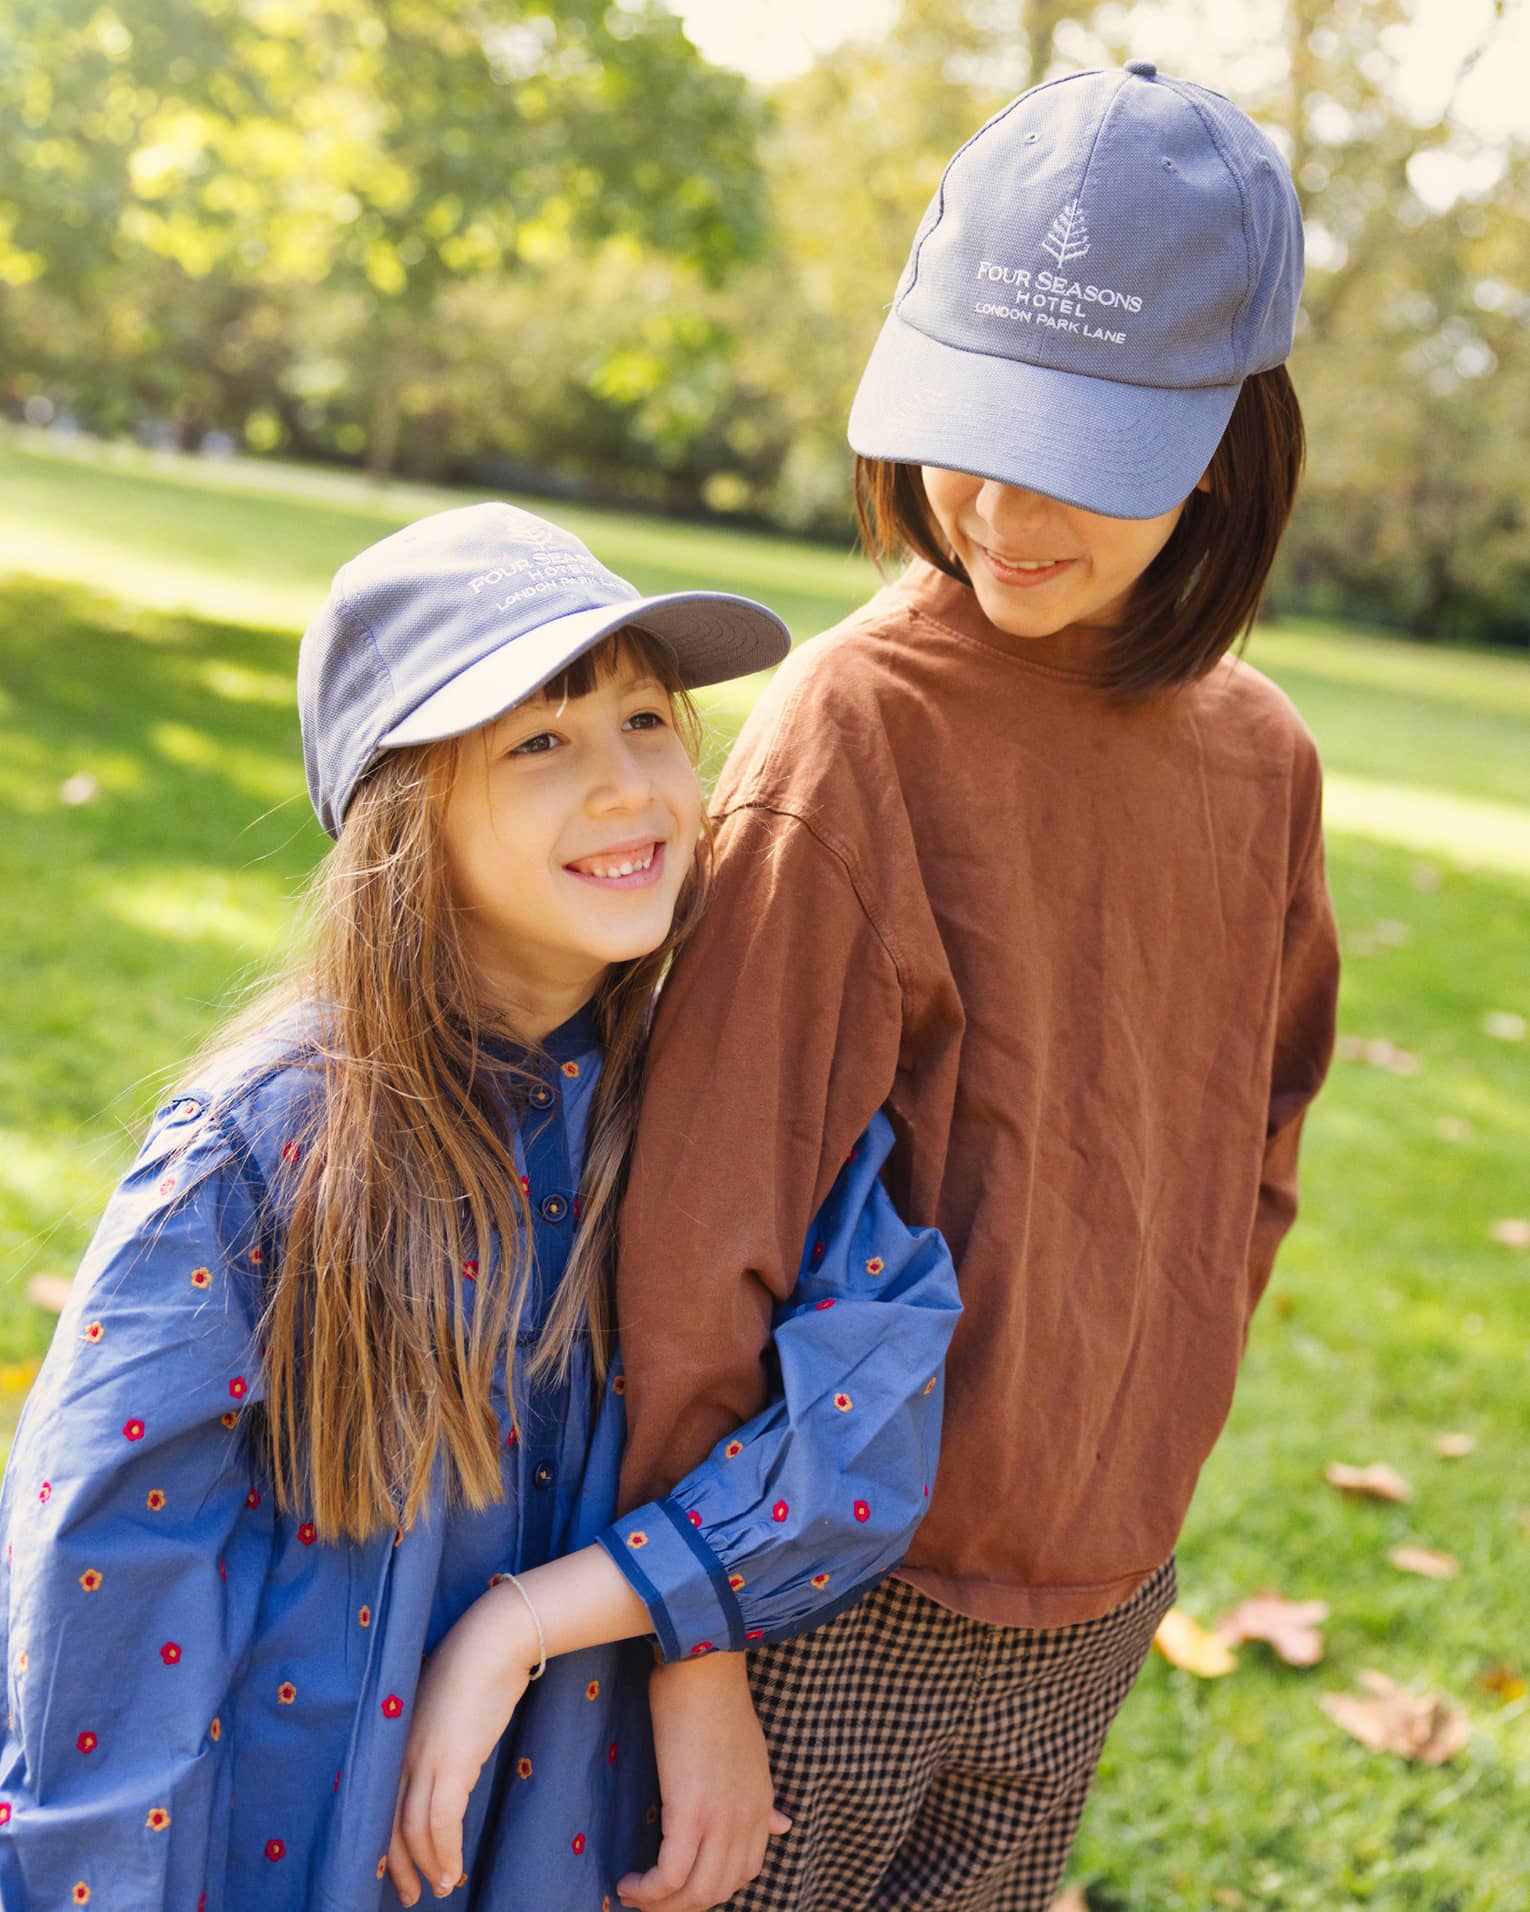 Two girls outside in fall clothing wearing blue Four Seasons Hotel baseball caps